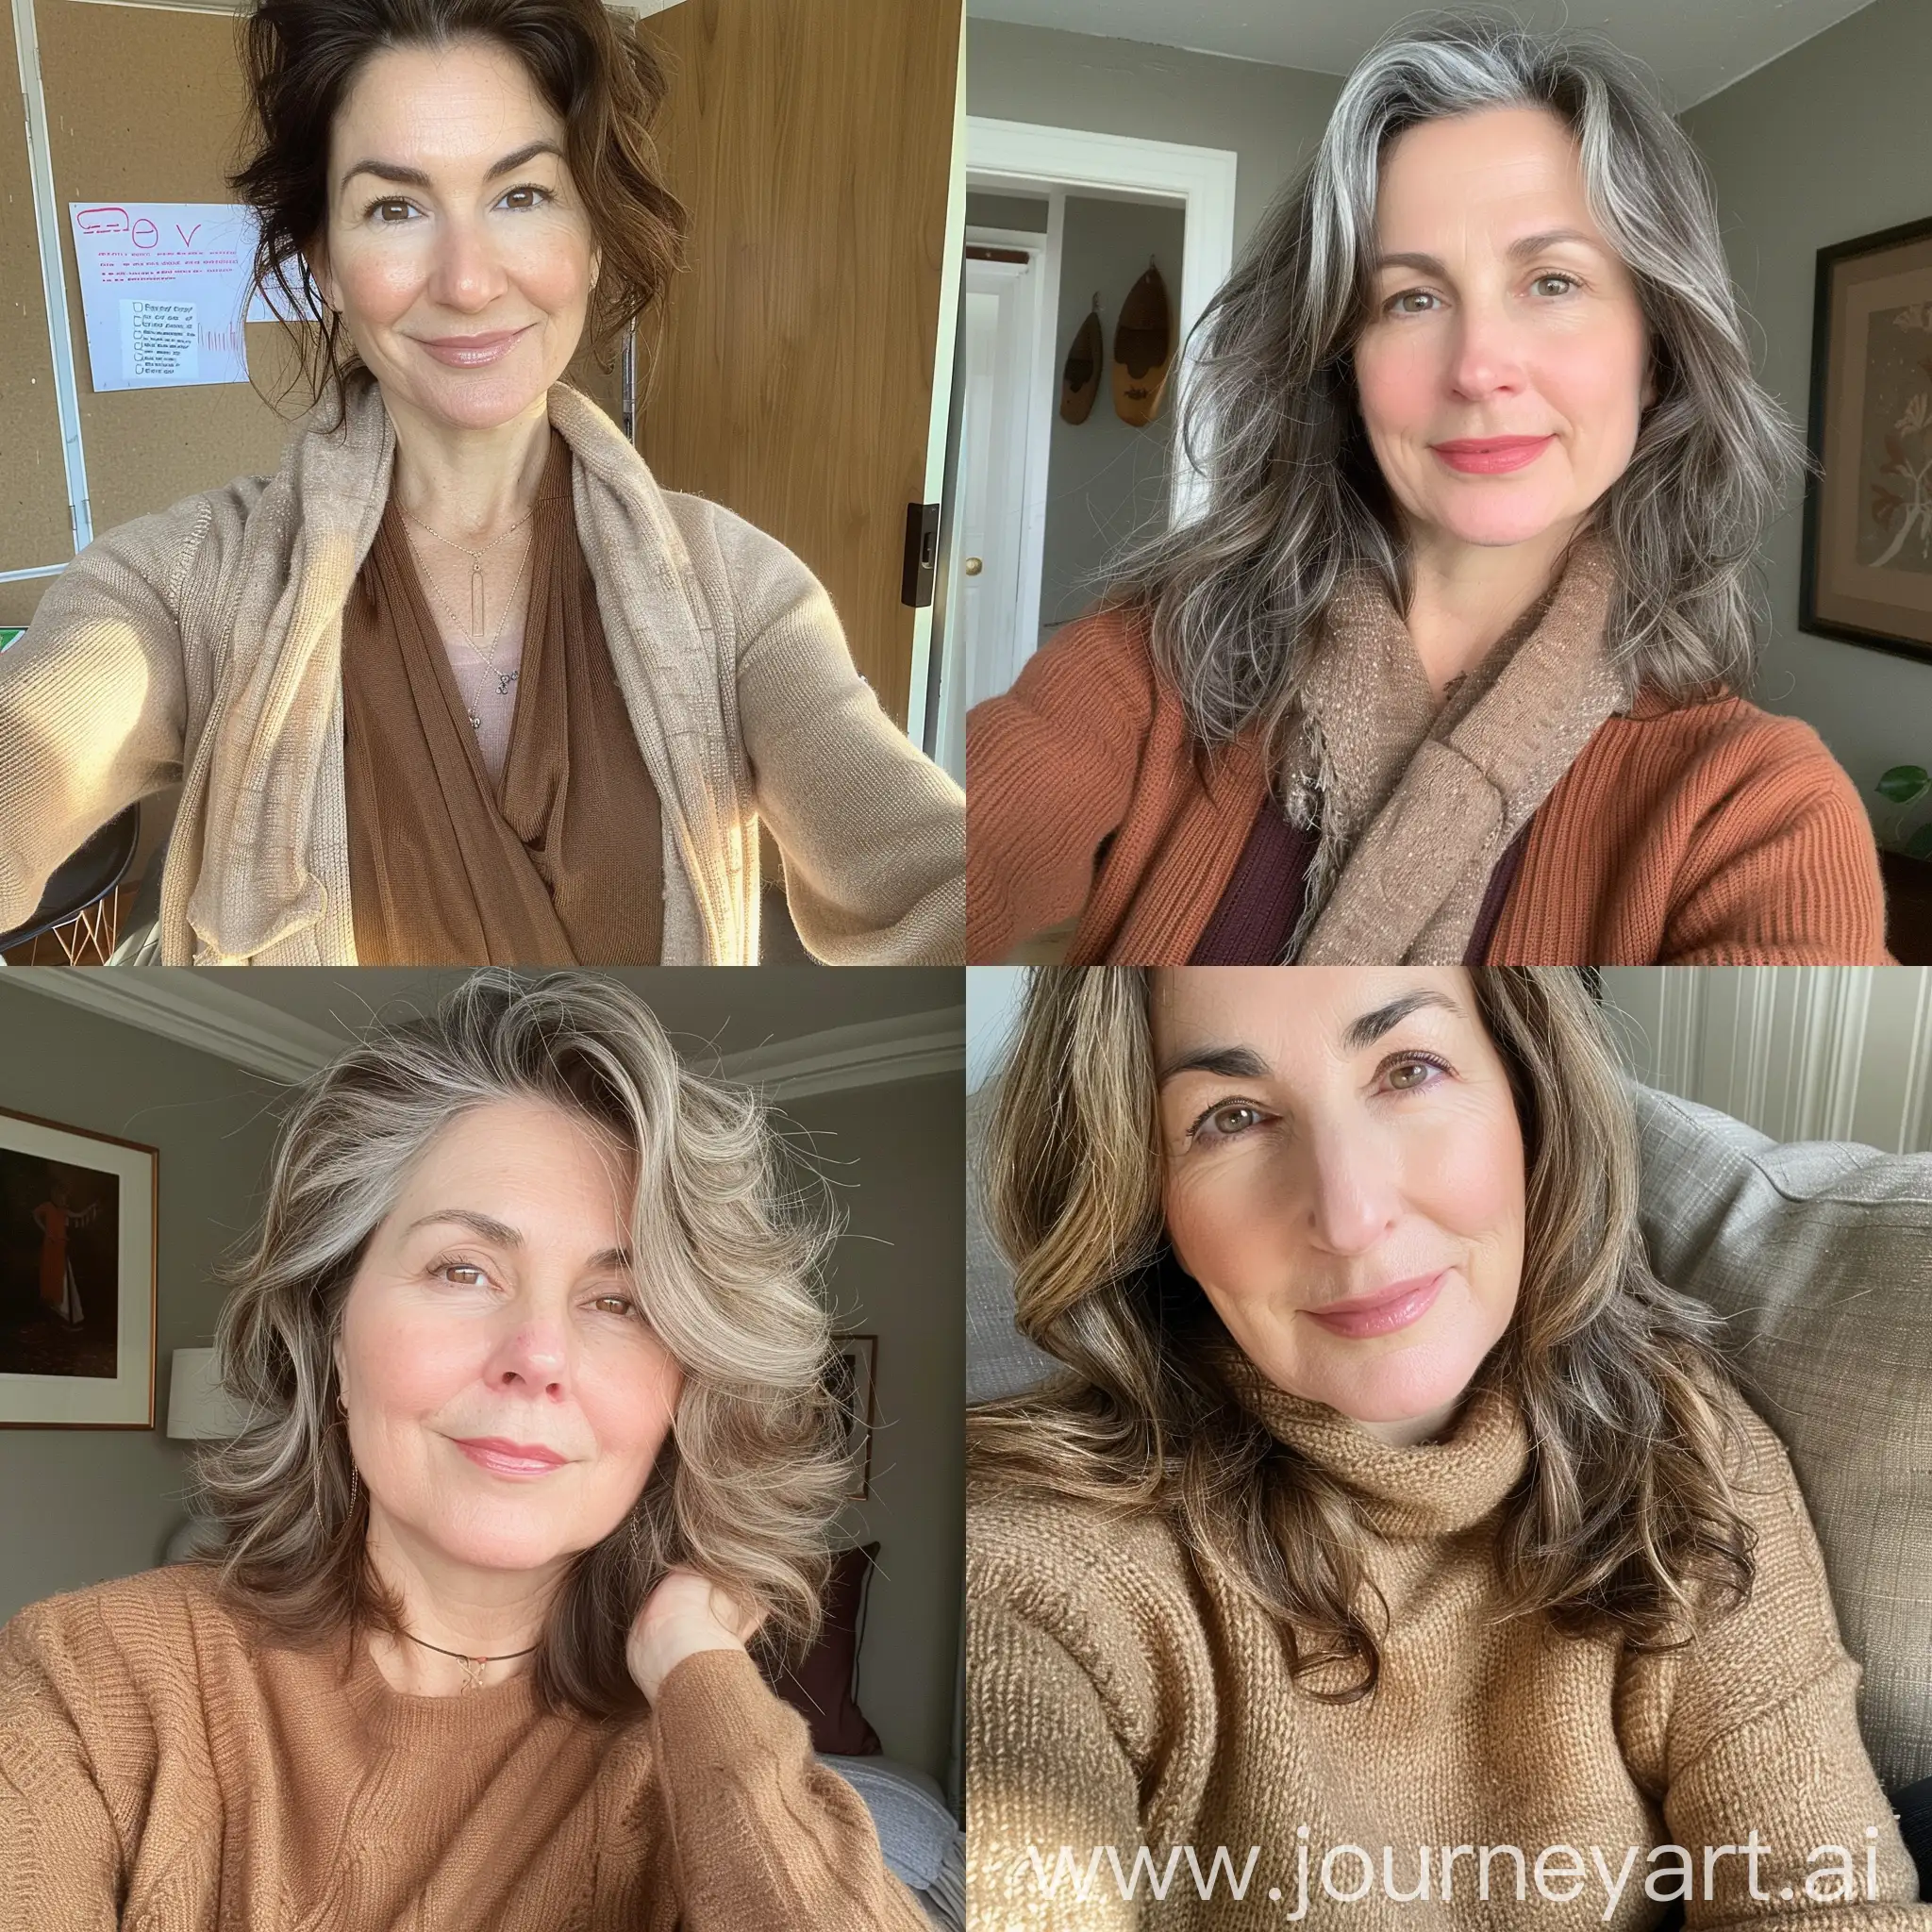 Aesthetic instagram selfie of a Middle School teacher, woman, mid 40's, soft brown clothing color tones--ar 9:16